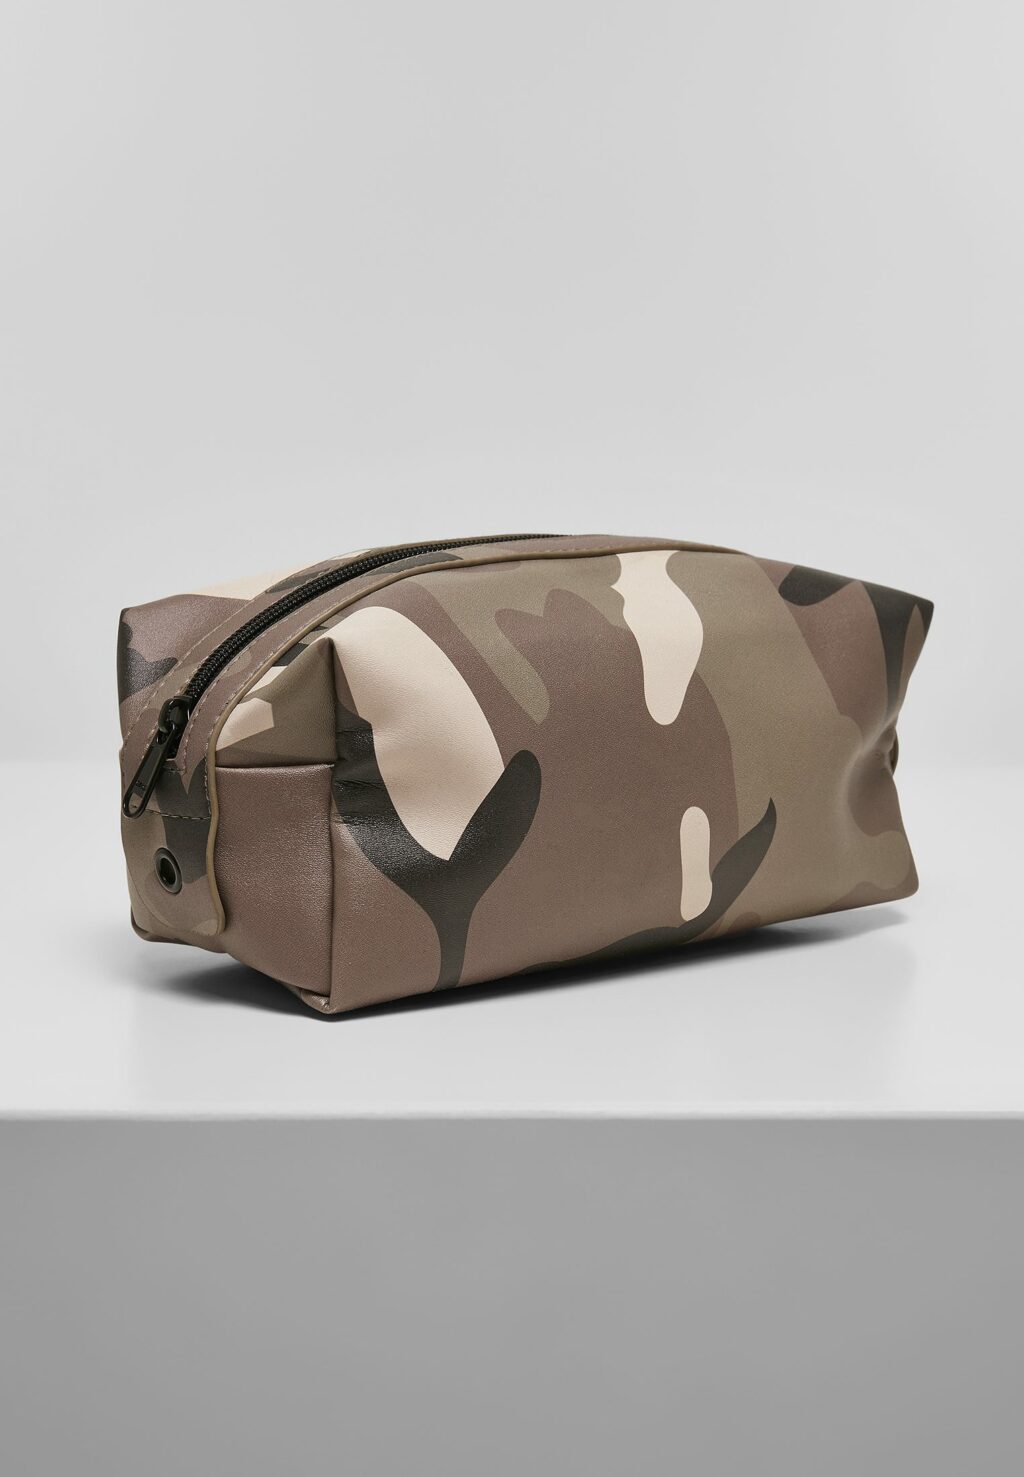 Synthetic Leather Camo Cosmetic Pouch browncamo one TB4864